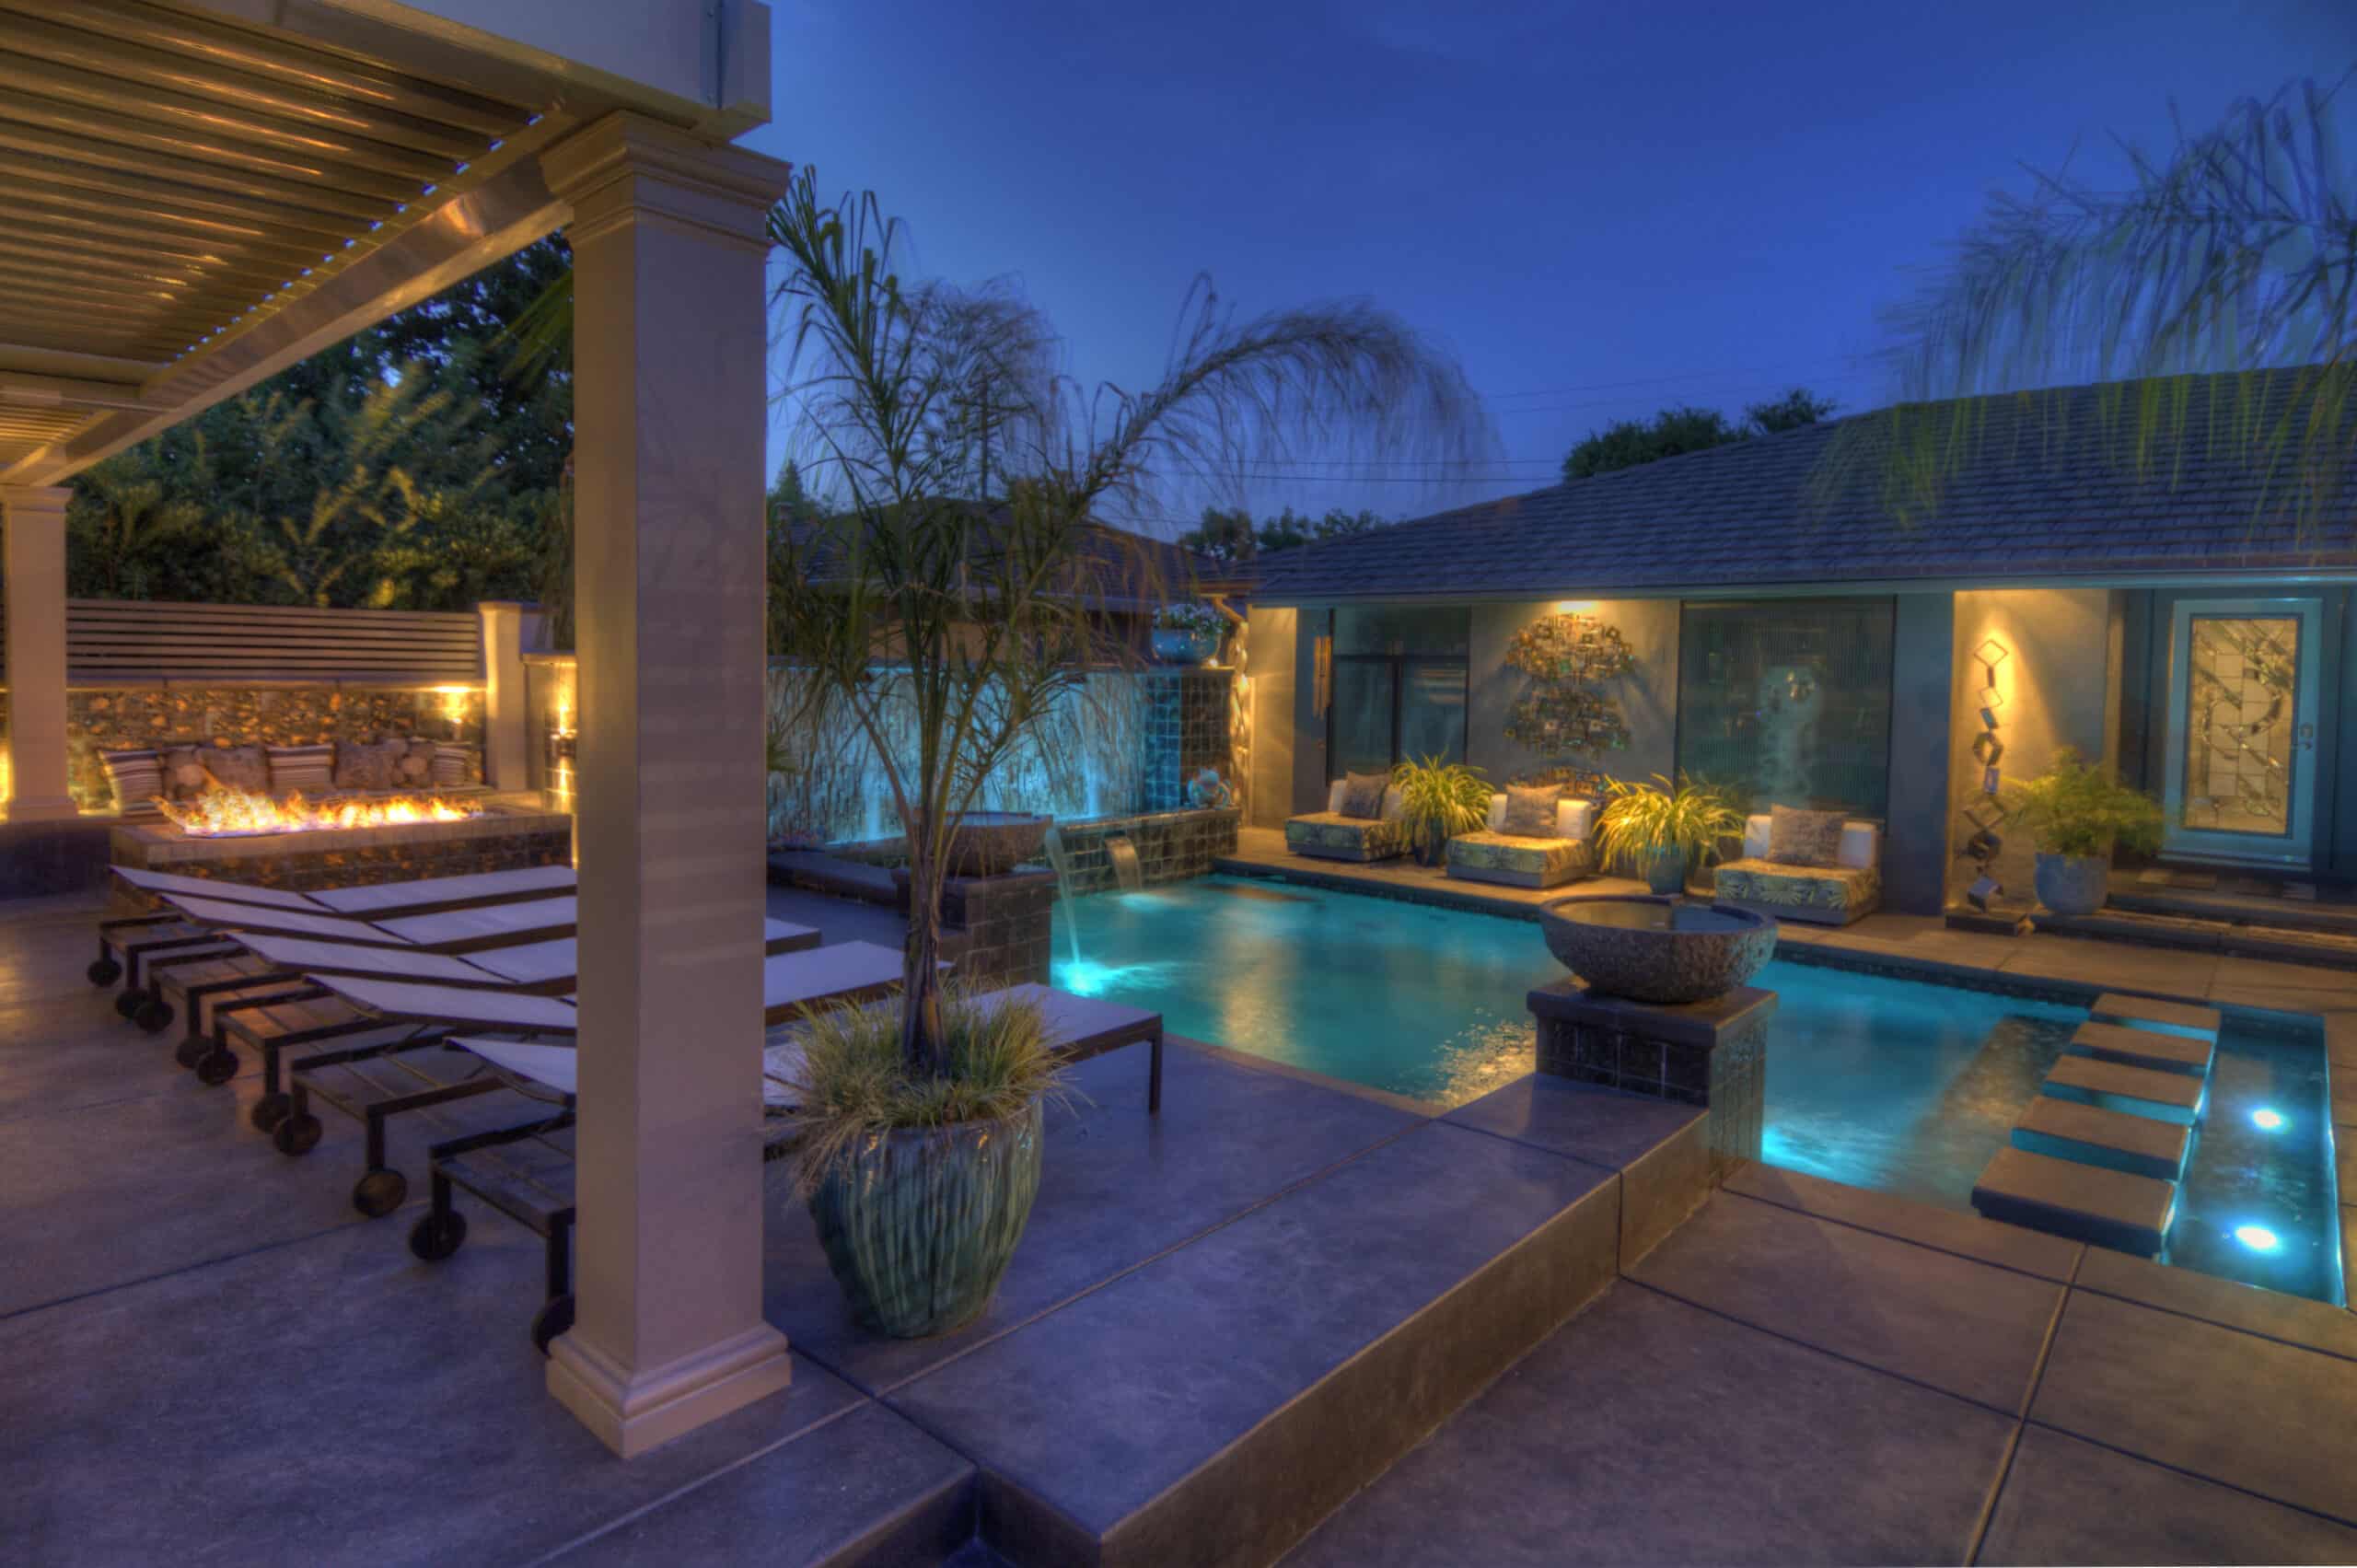 Pool & Spa Inspection Services in Dallas